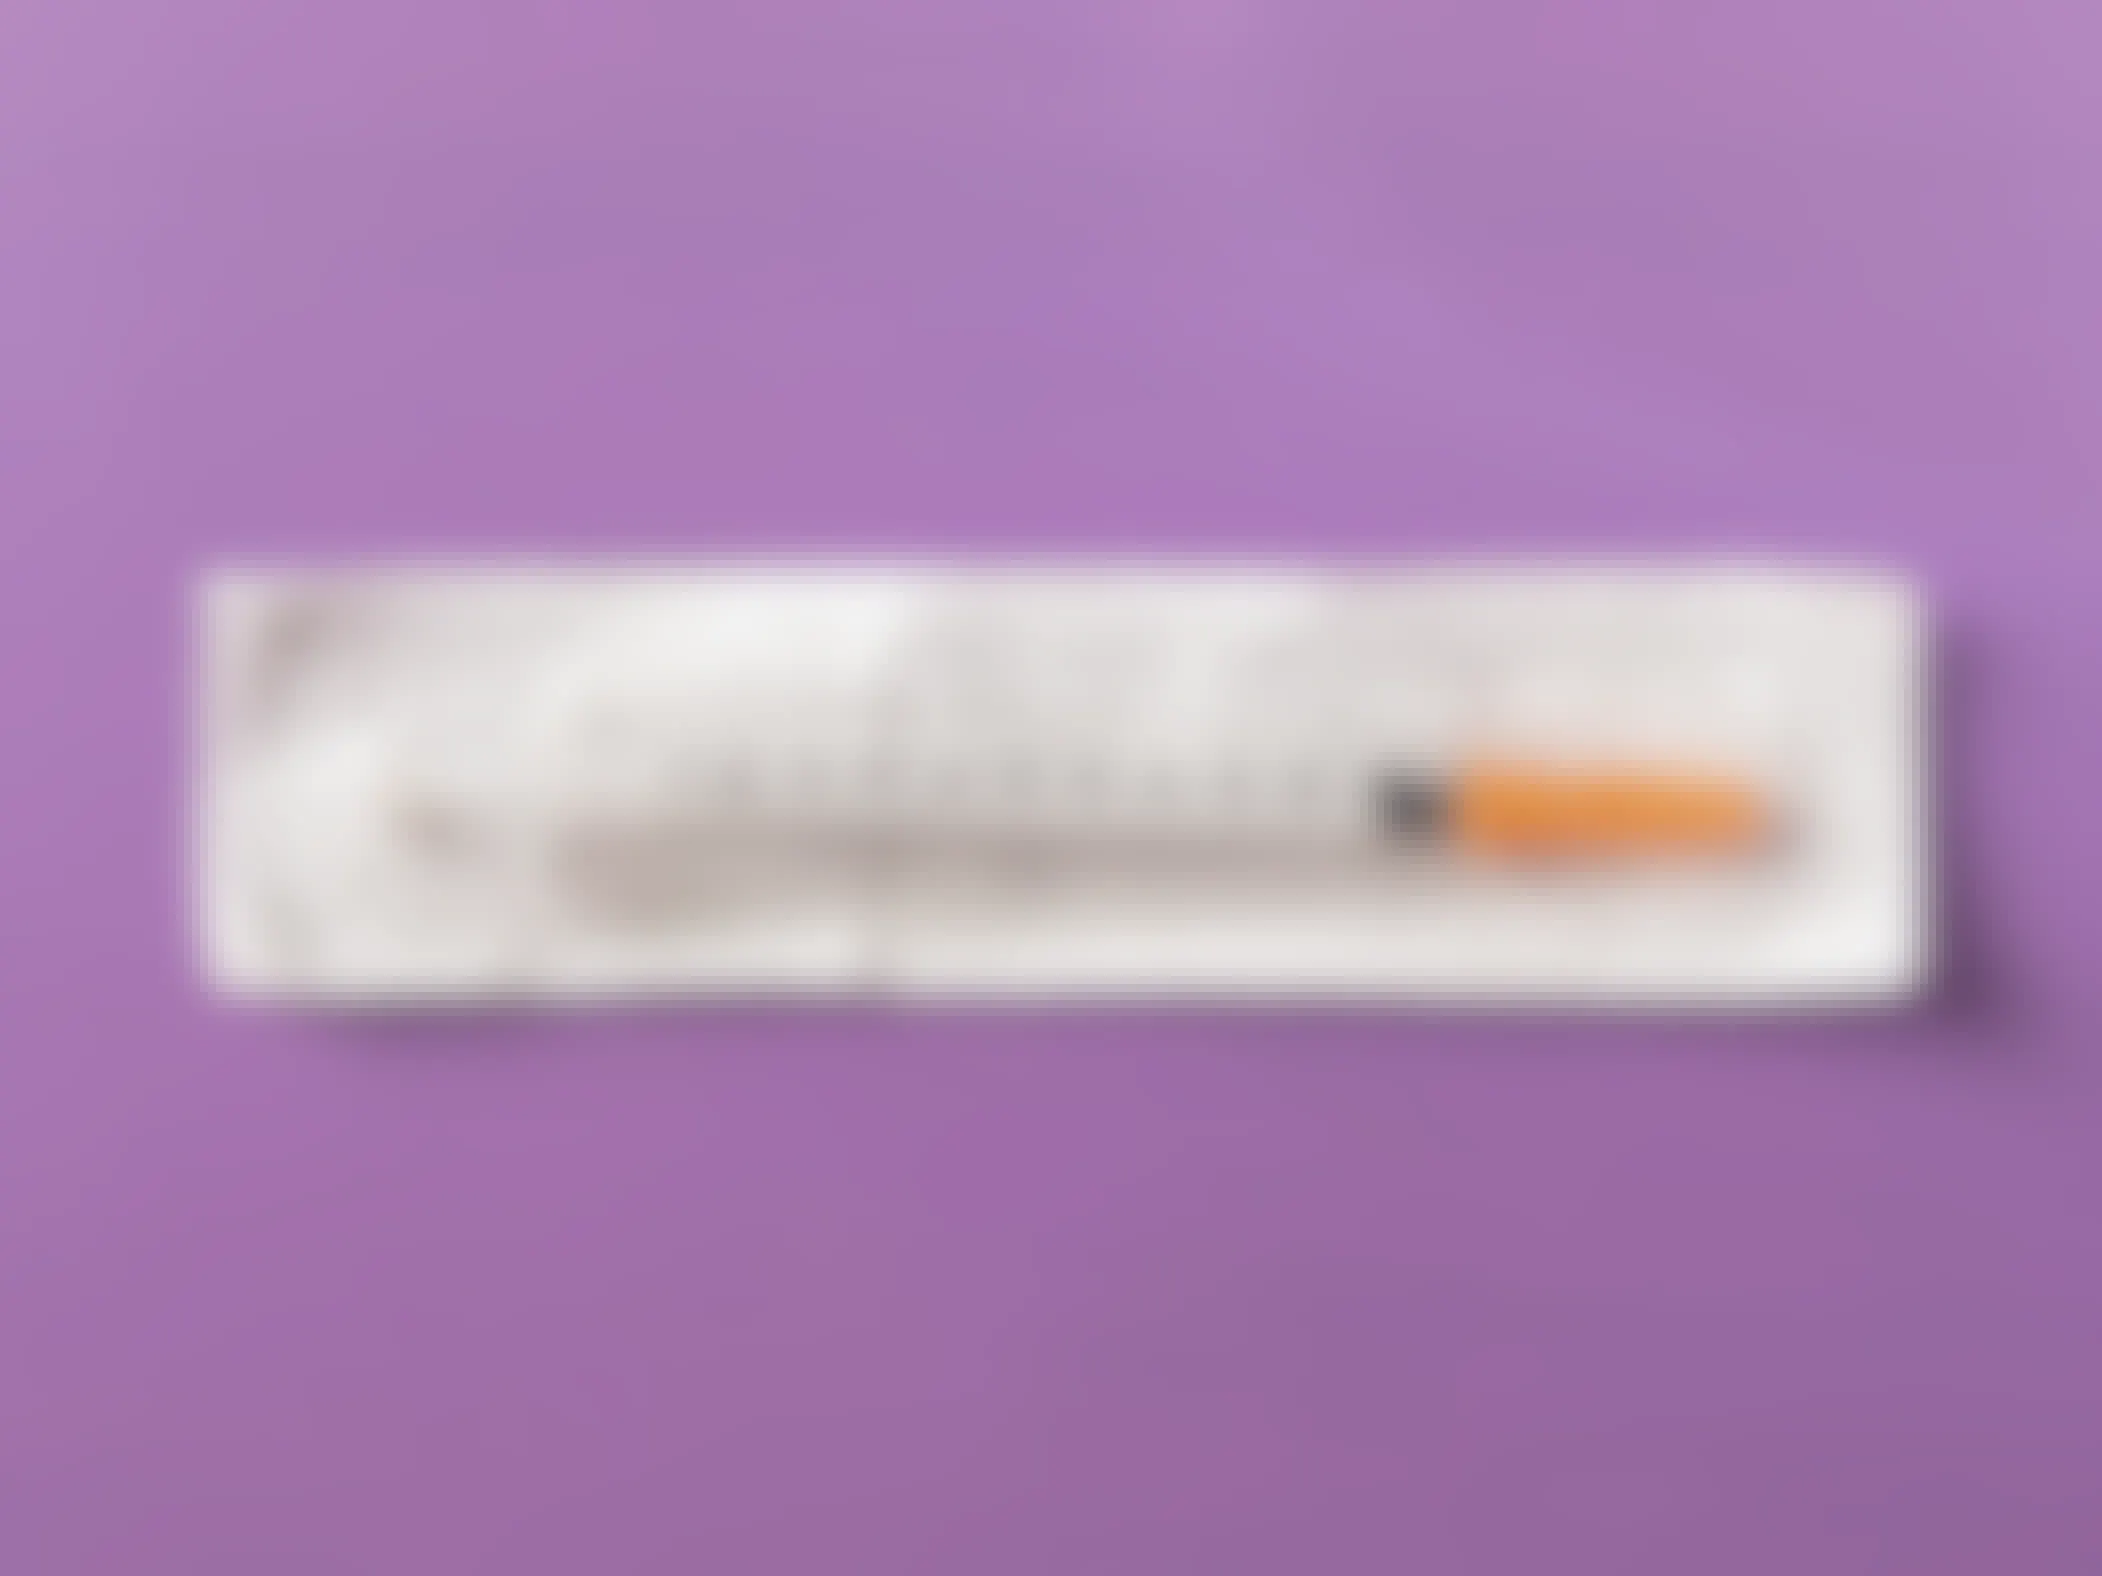 disposable plastic insulin syringe with needle in package on violet background